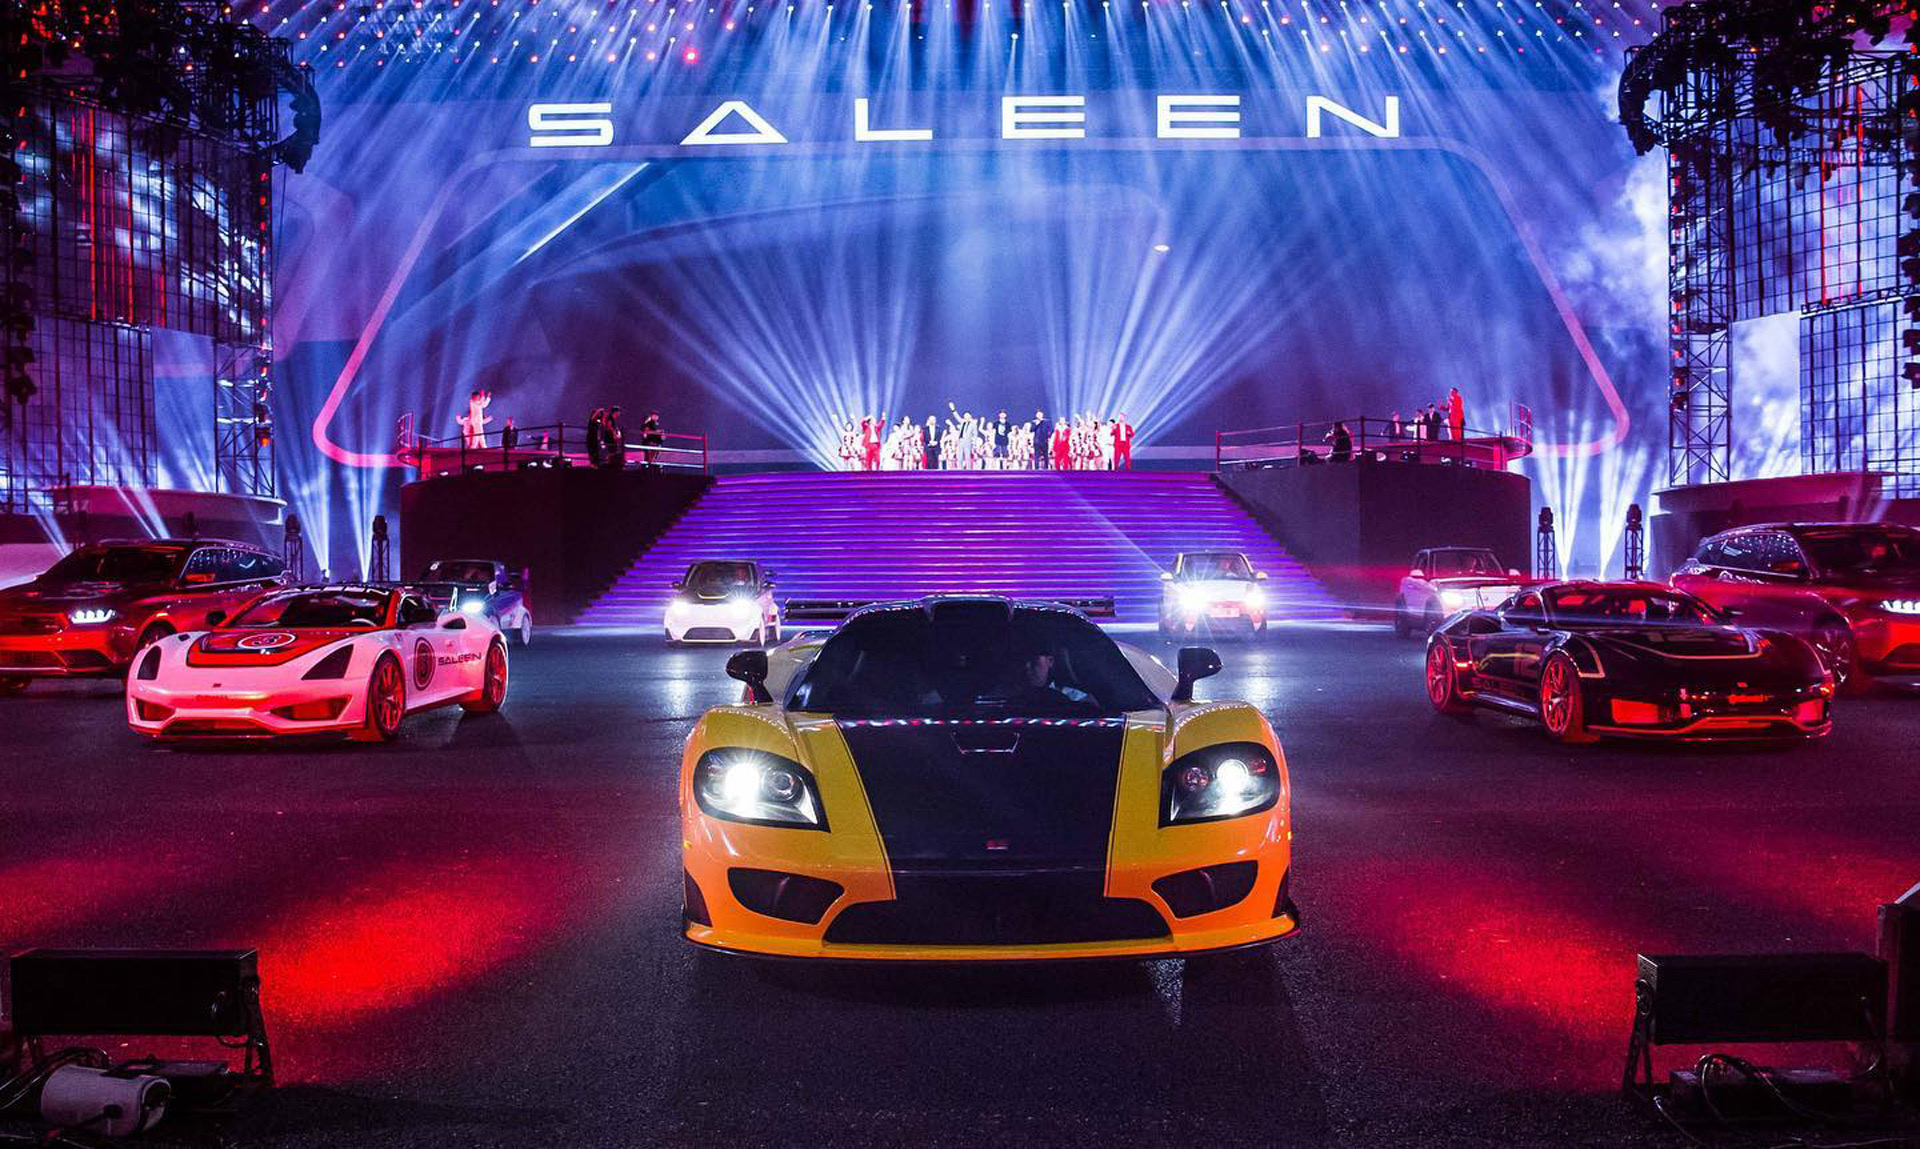 Saleen, Saleen S7 returns, this time with 1,500 horsepower, ClassicCars.com Journal